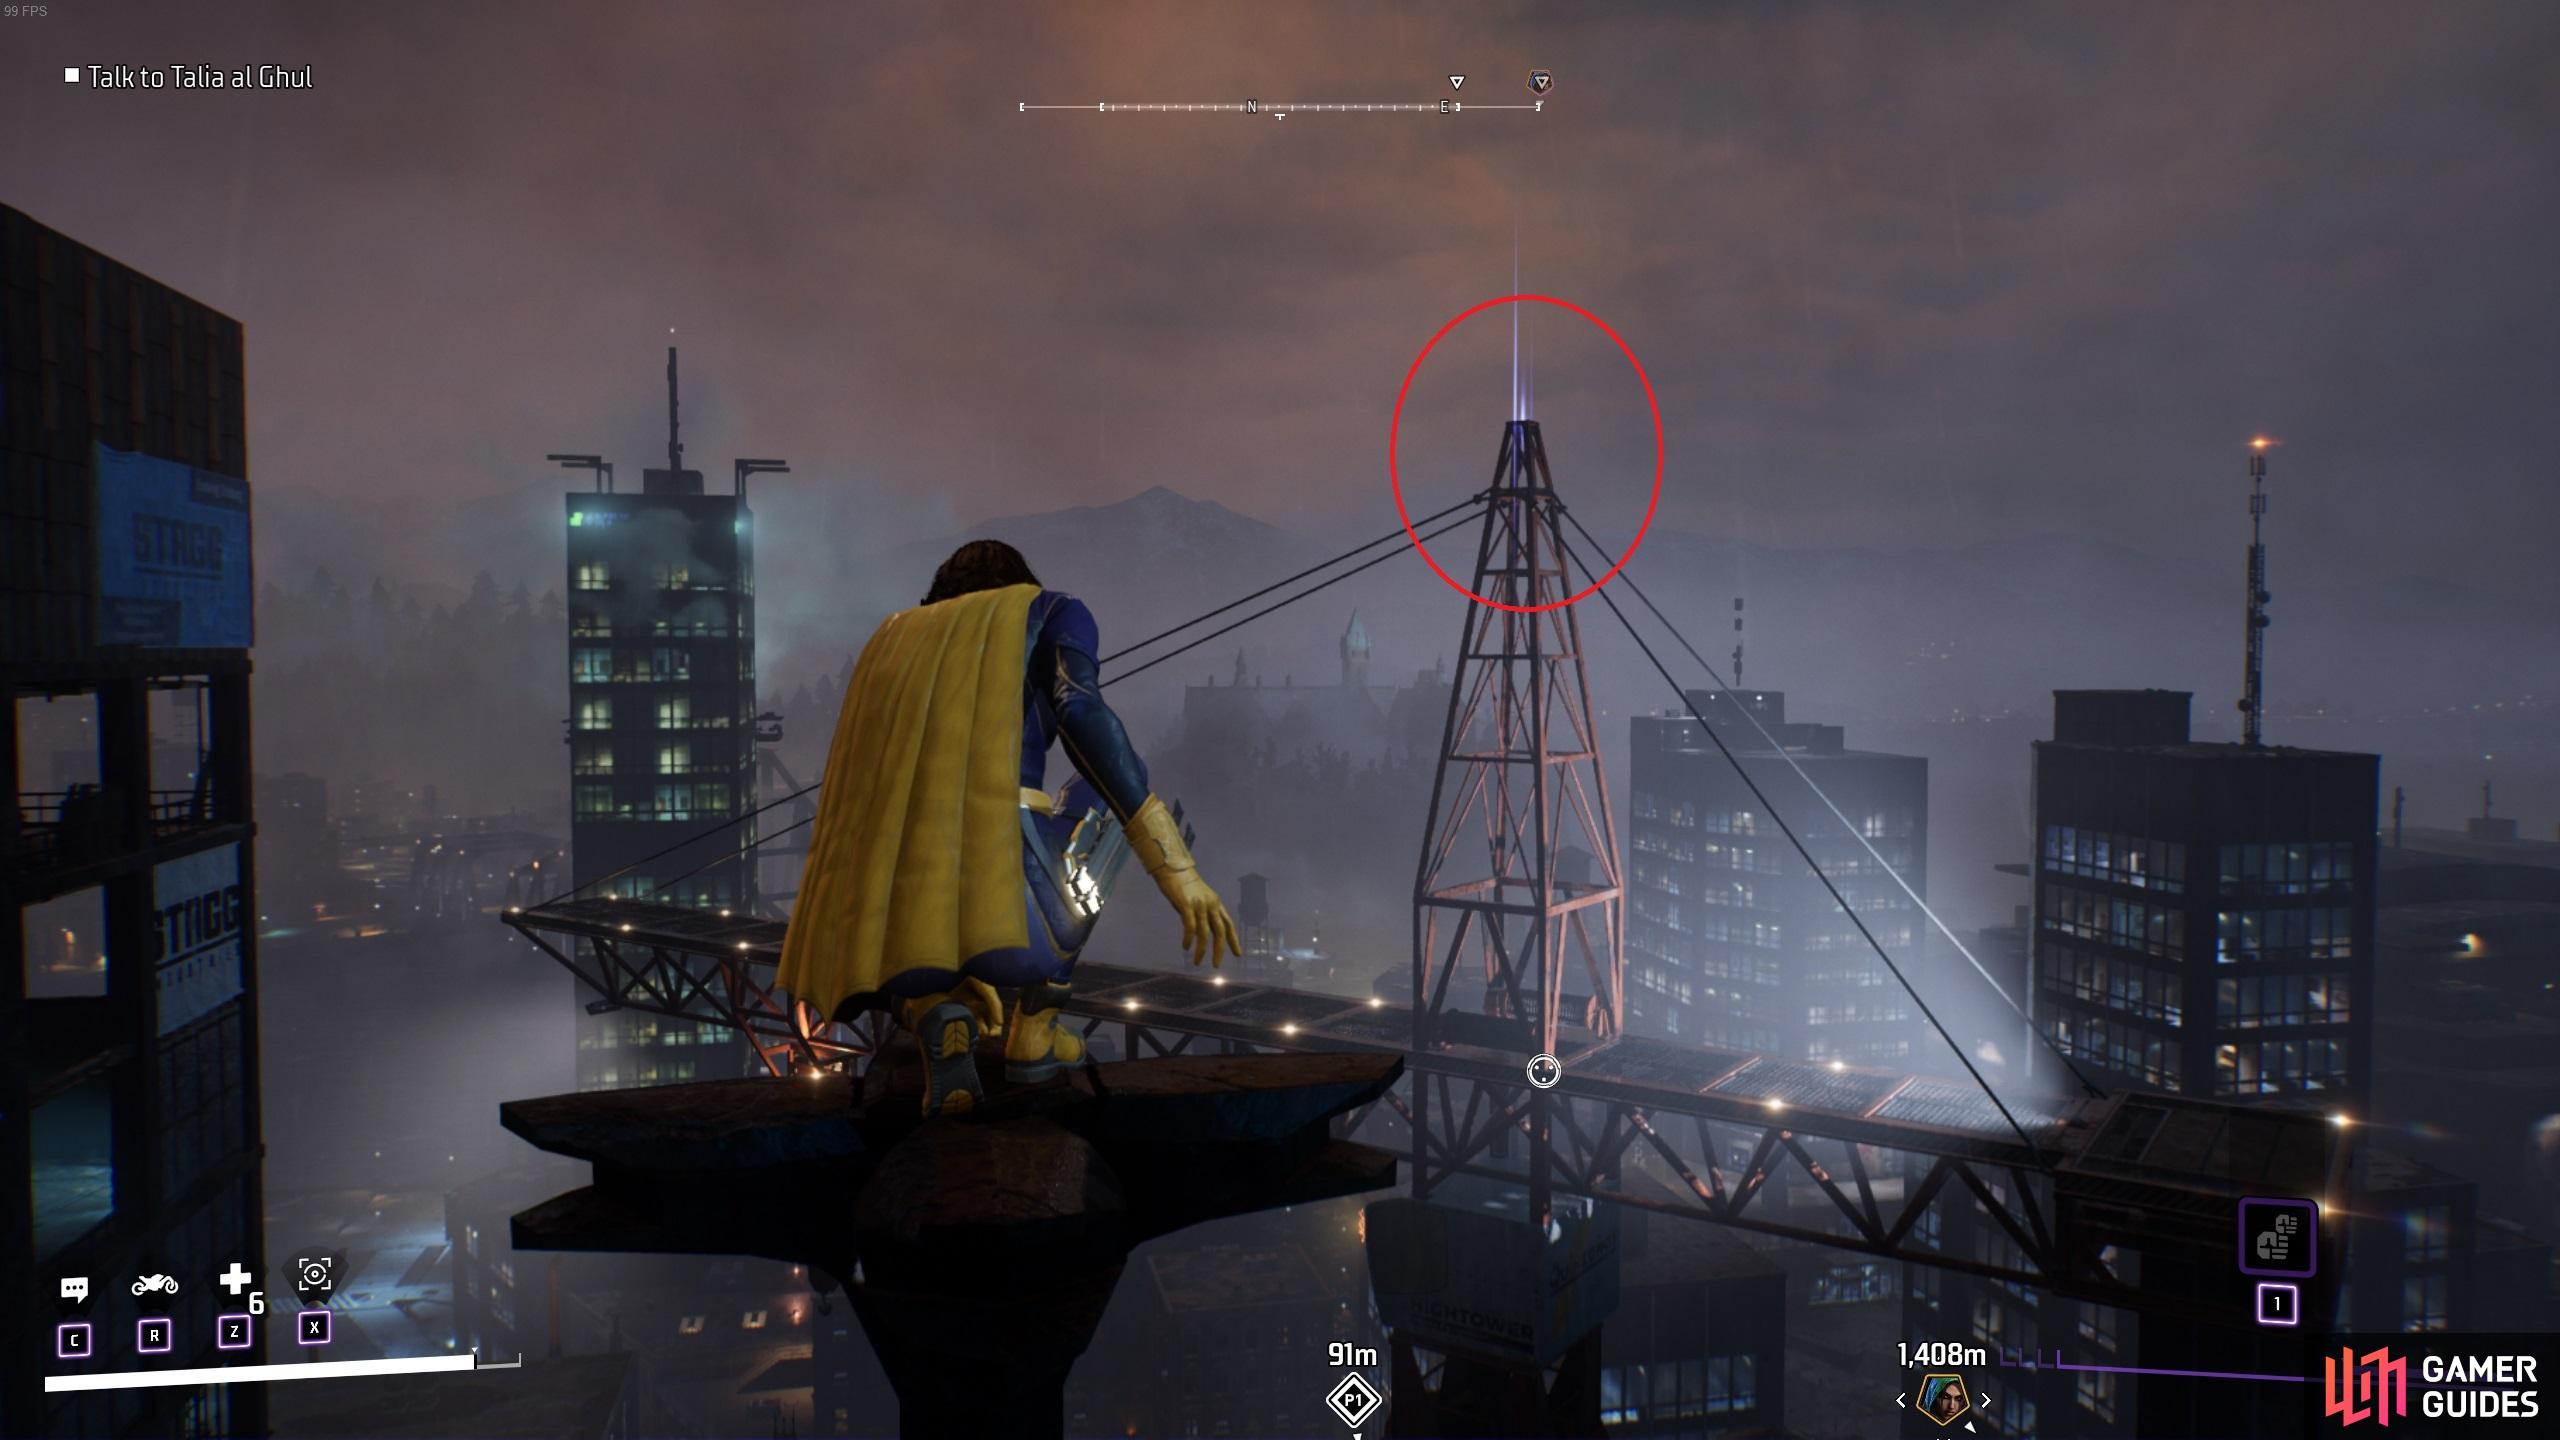 You’ll need to grapple onto the top of the crane to obtain this Batarang.